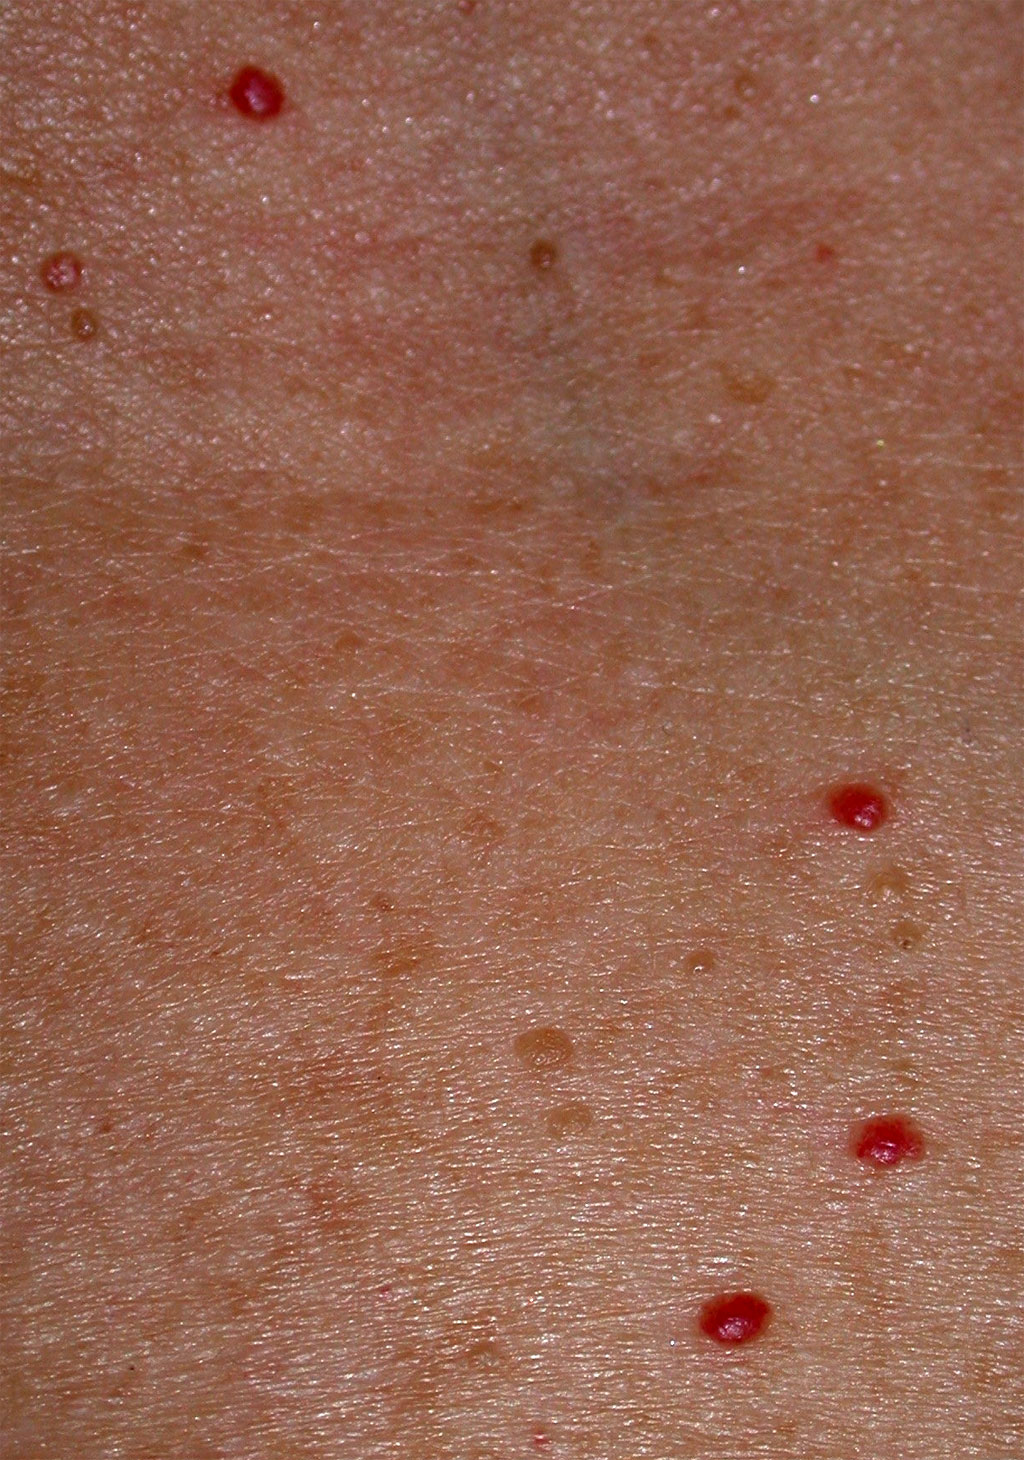 Sudden tiny bumps on face - Skin Problems Message Board ...